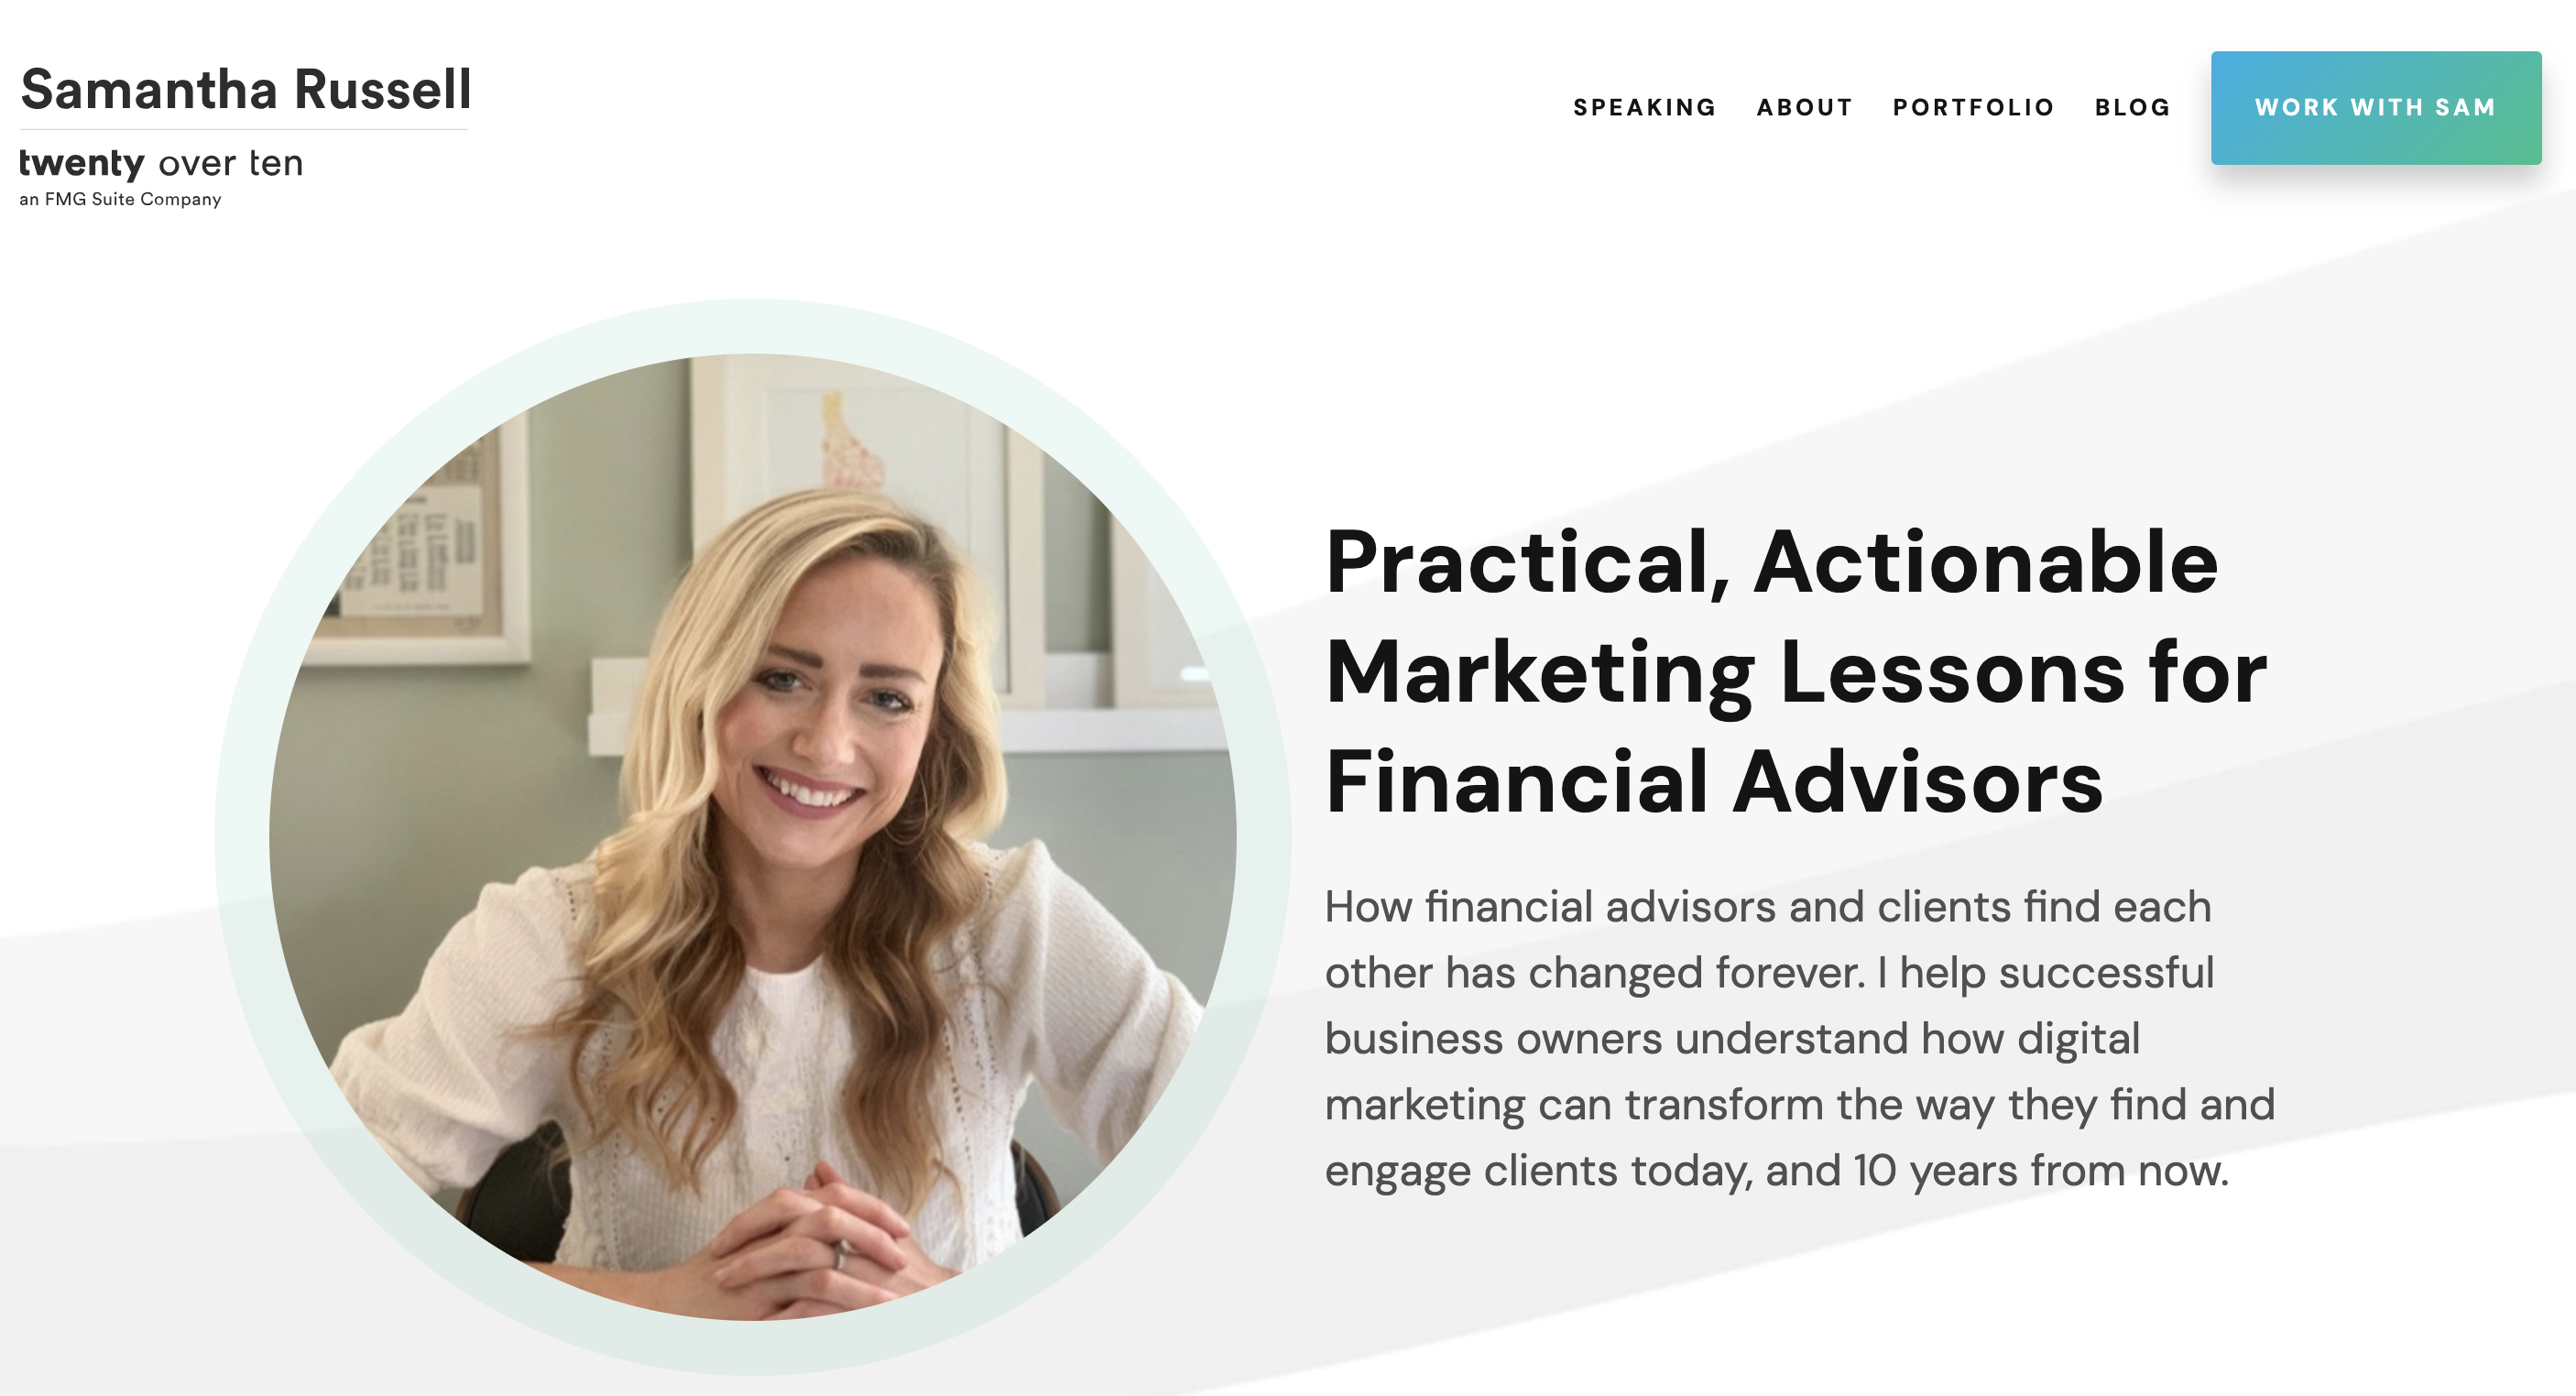 Popular Financial Influencers for Advisors to Follow: Samantha Russell